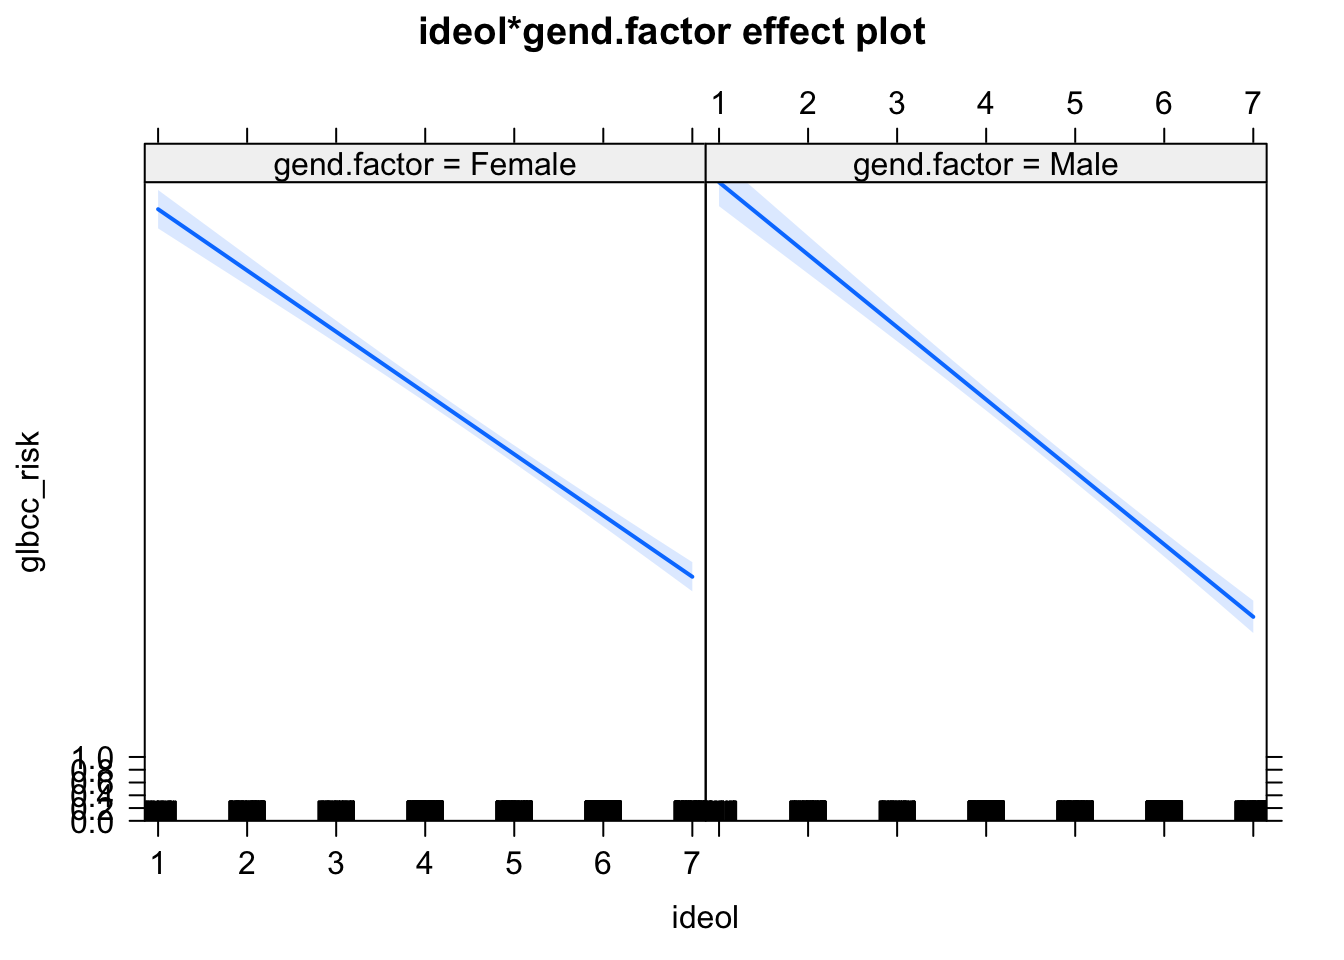 Interaction of Ideology and Gender